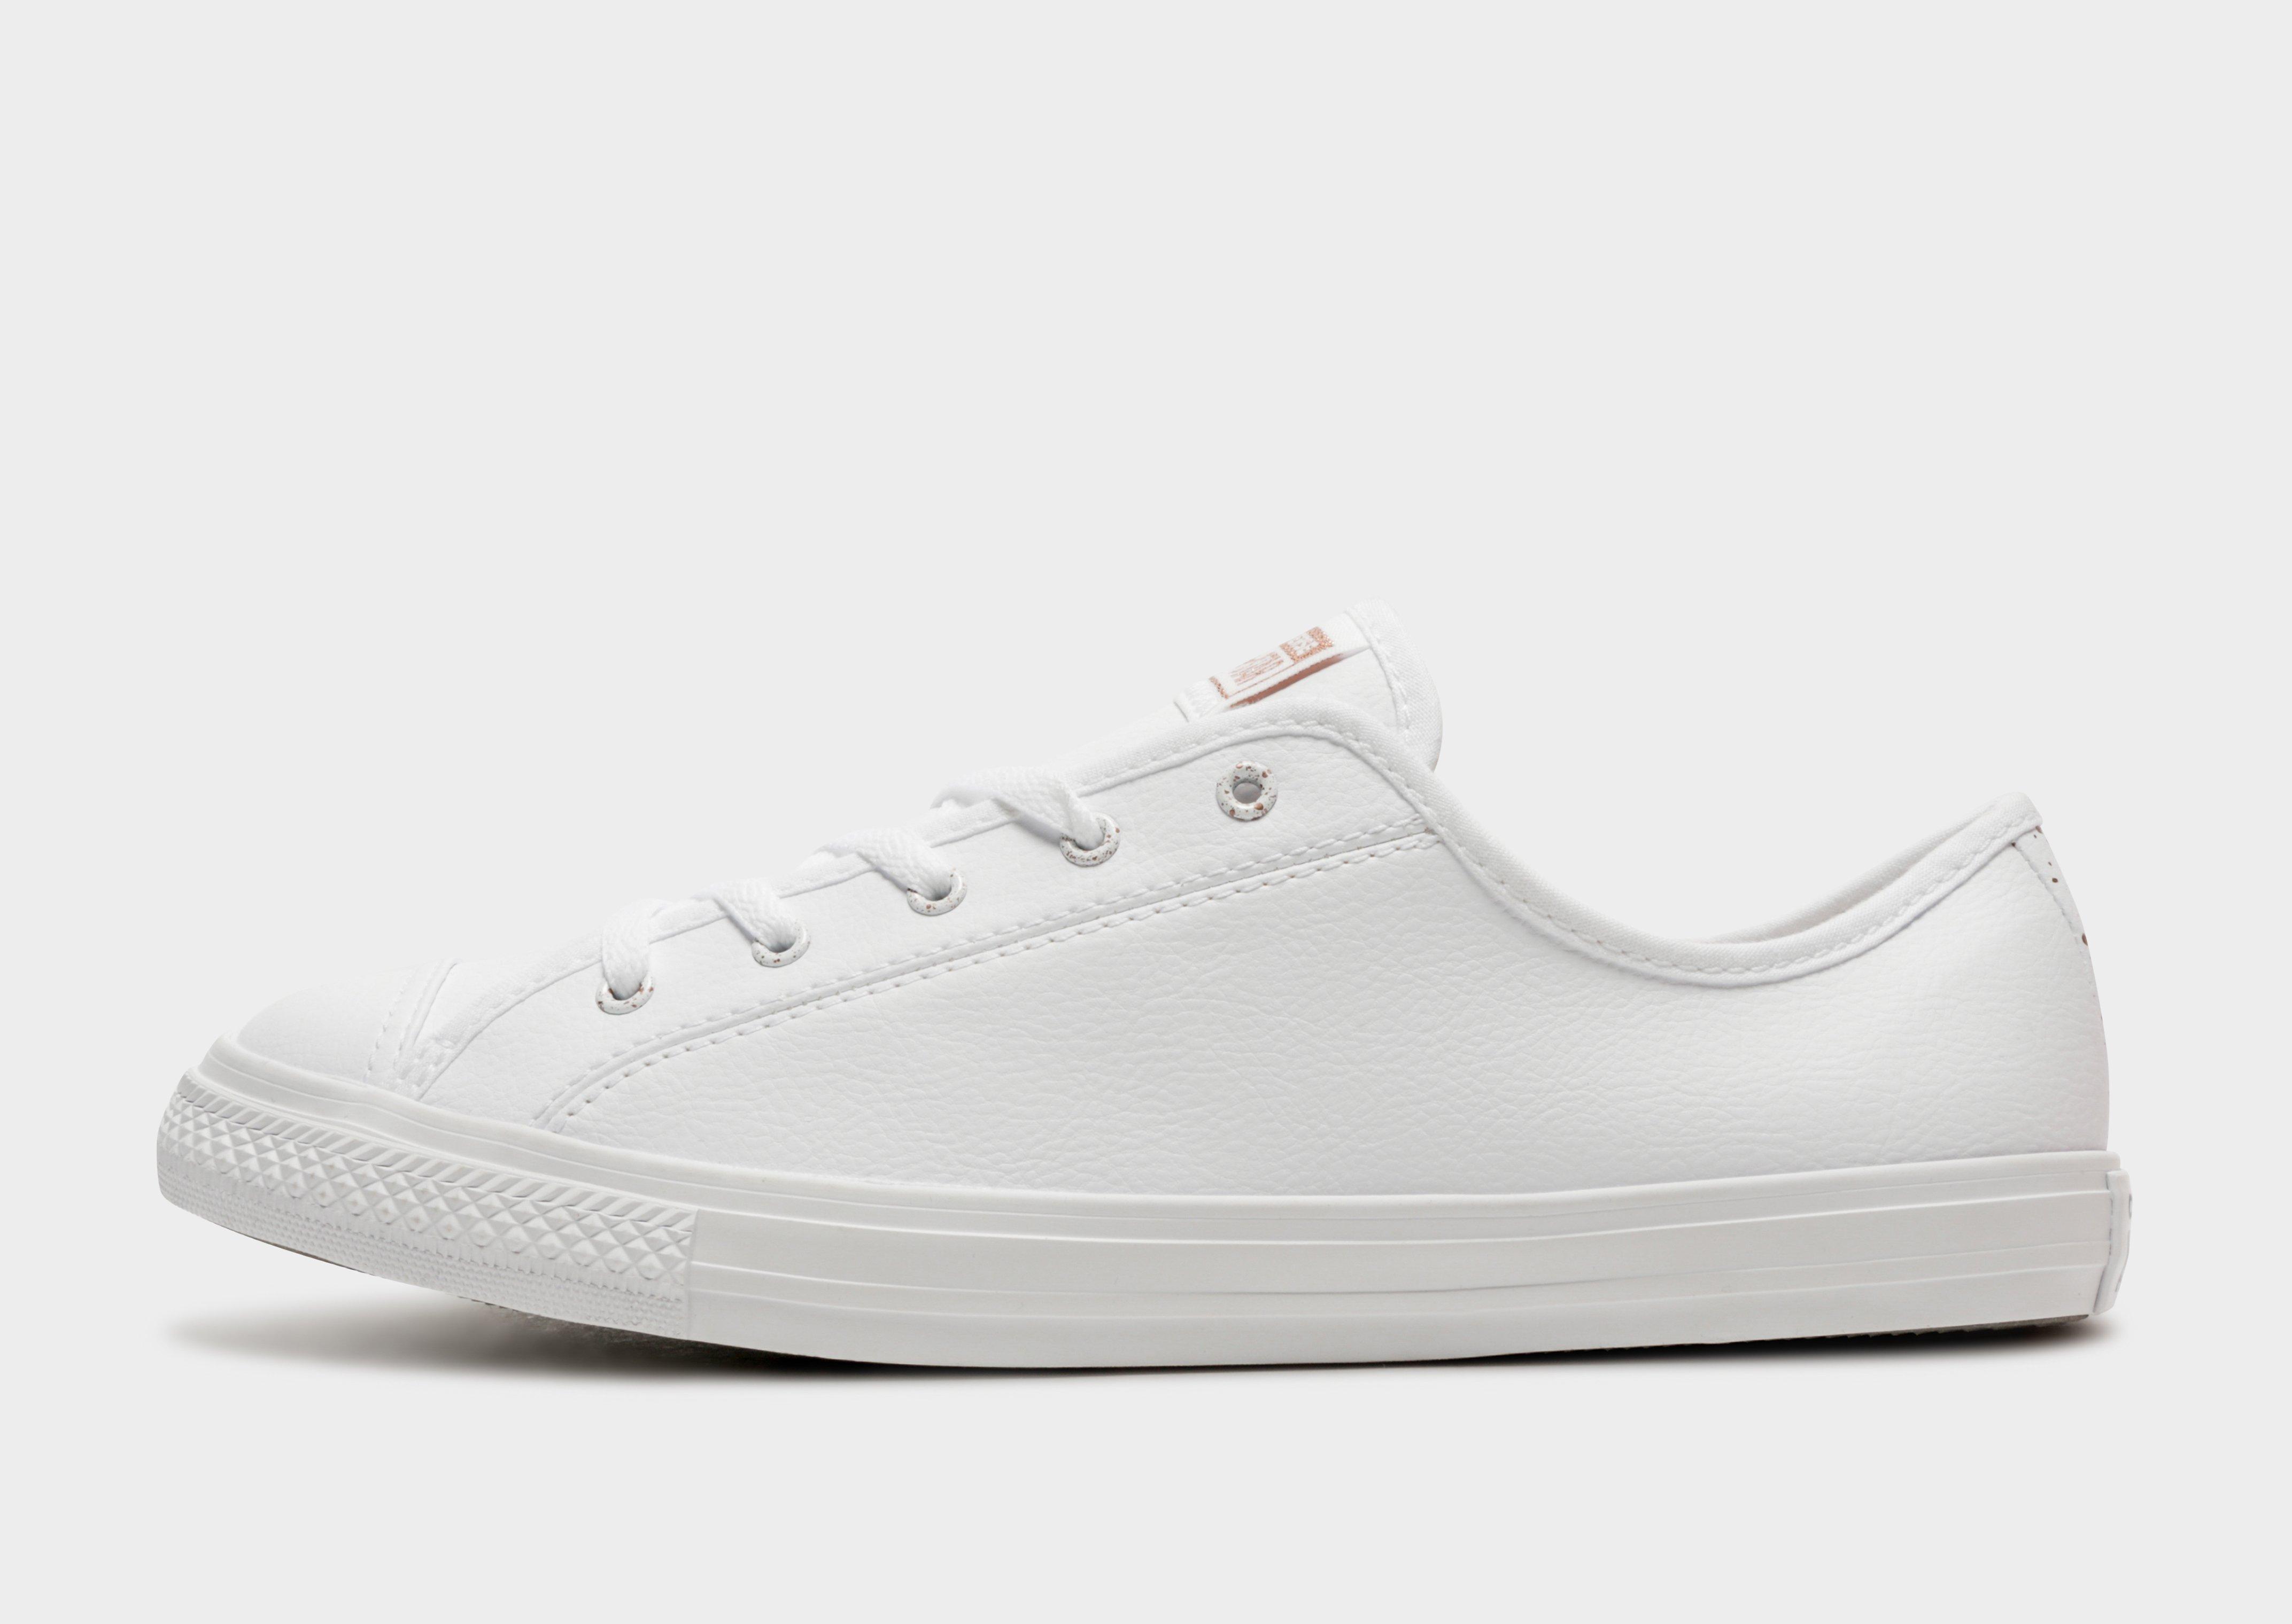 white leather converse womens jd, OFF 73%,Best Deals Online.,